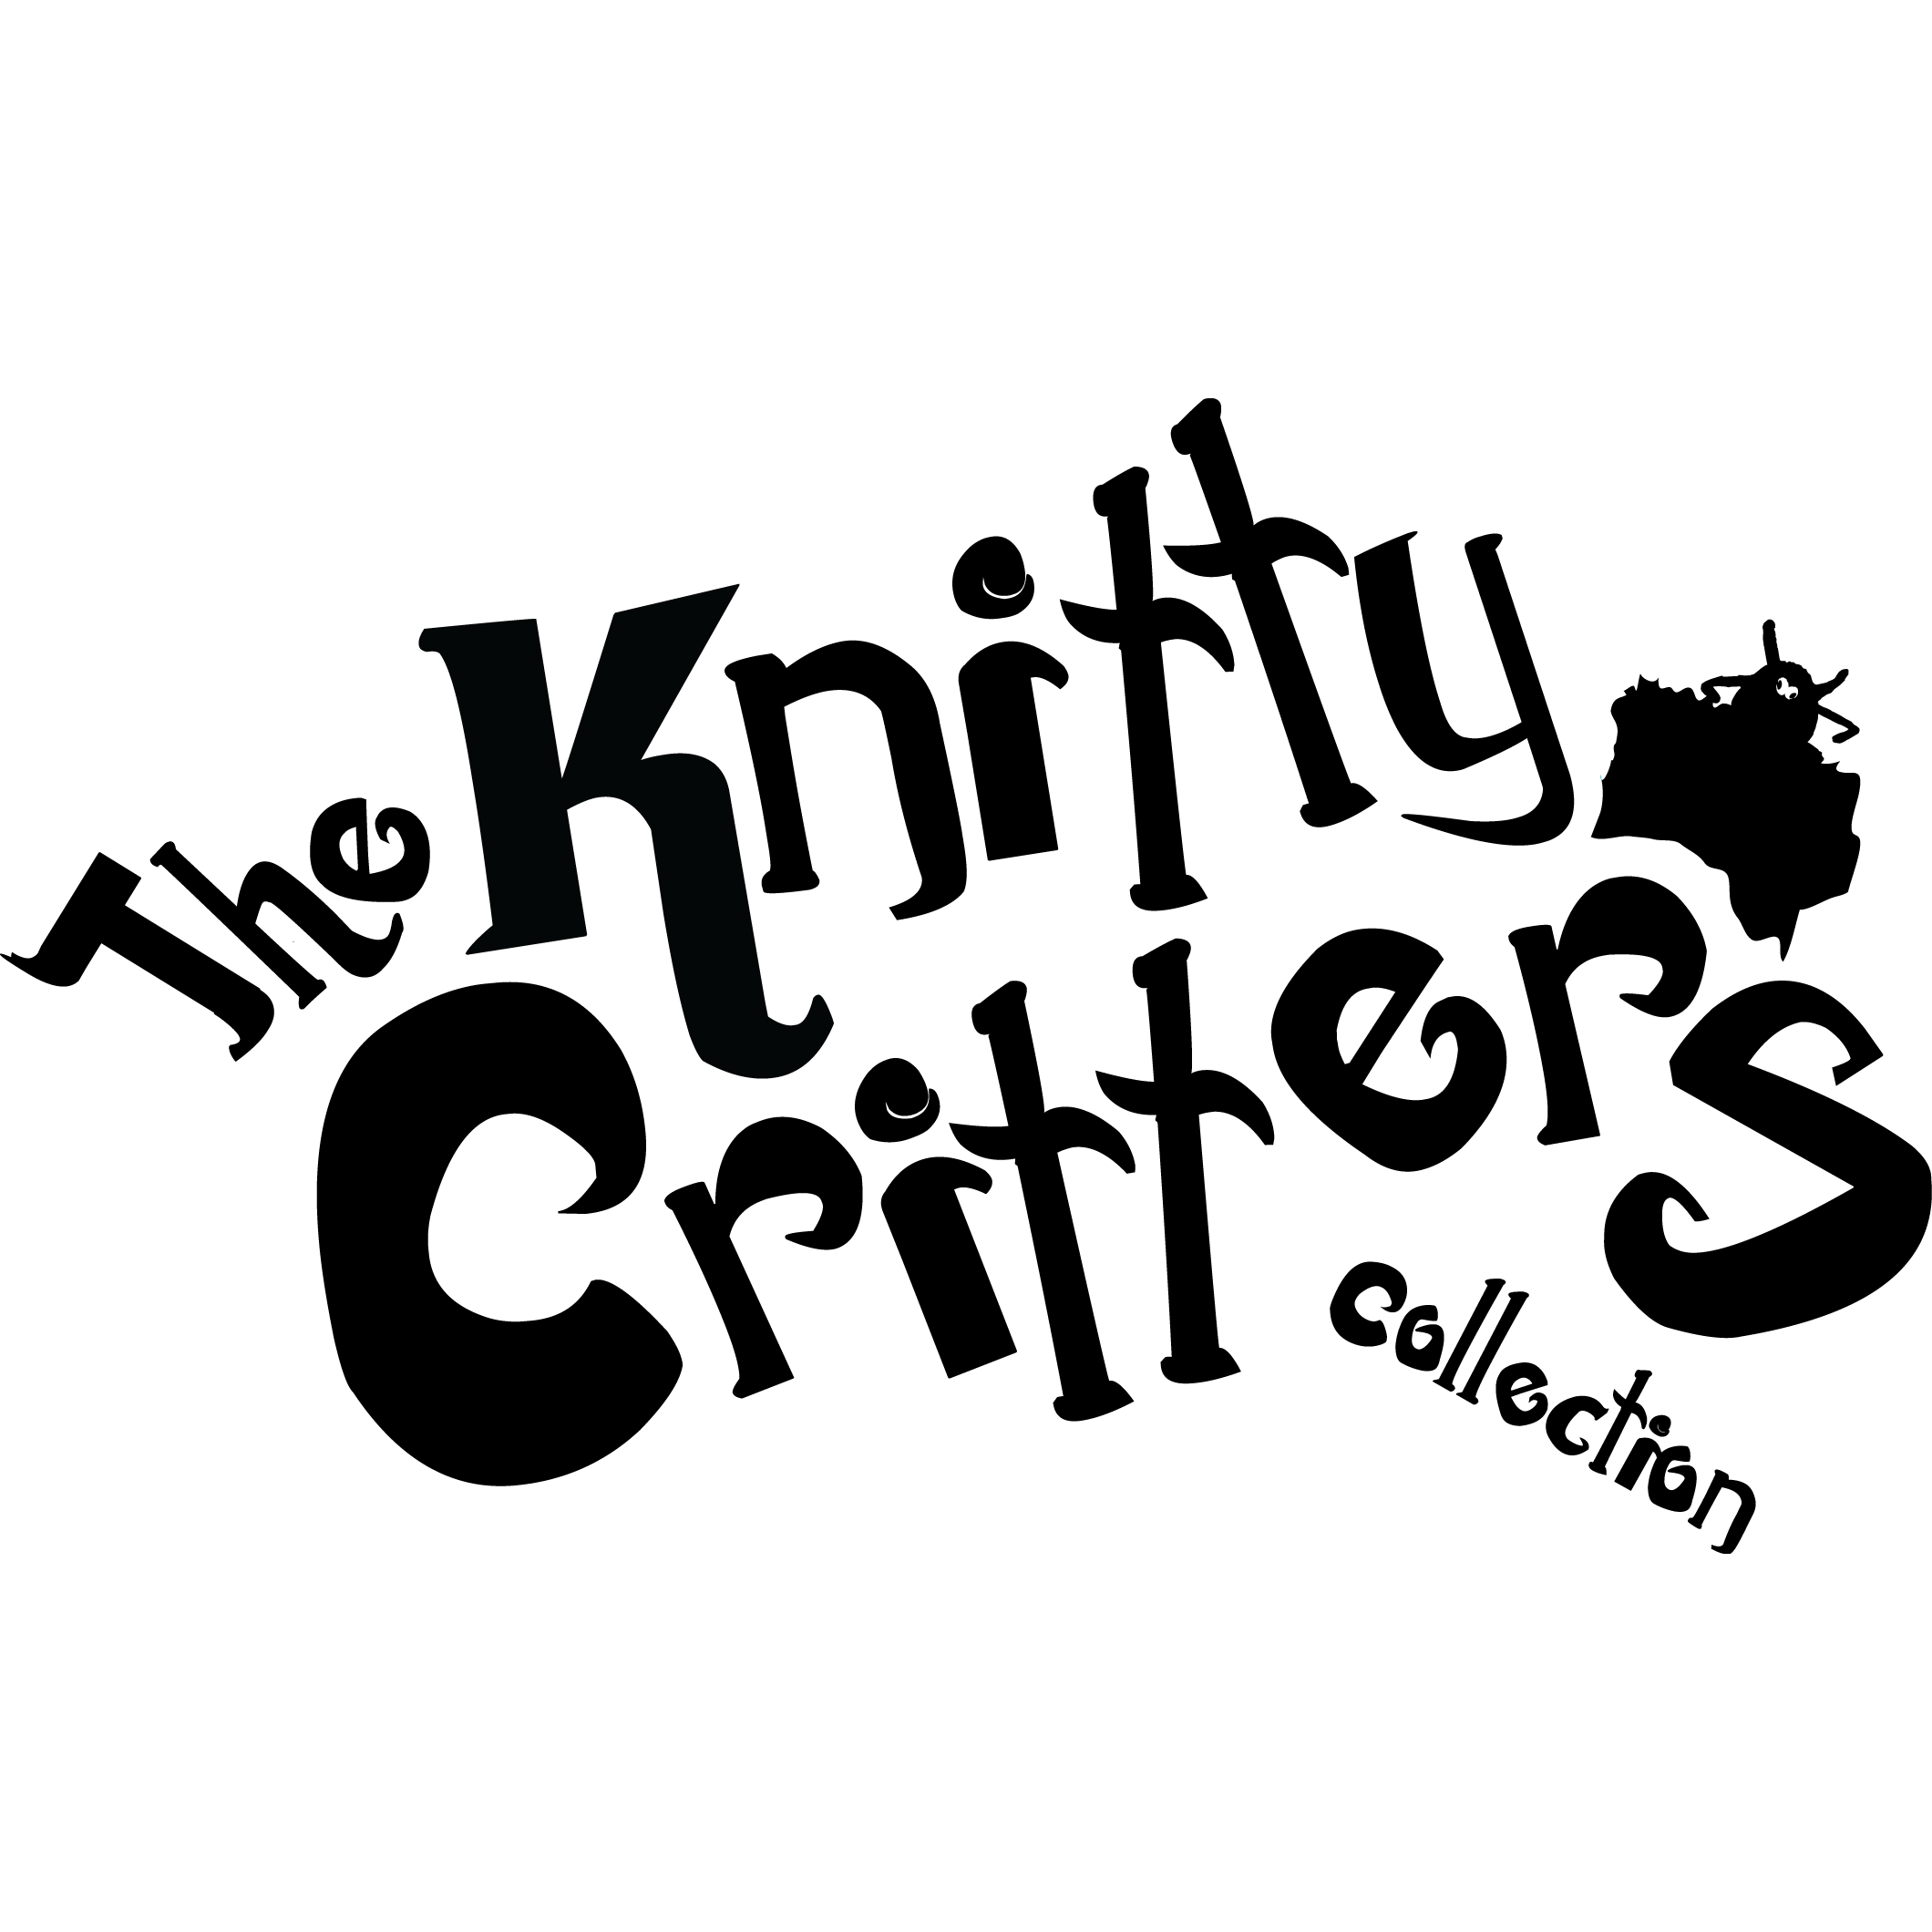 Knitty Critters